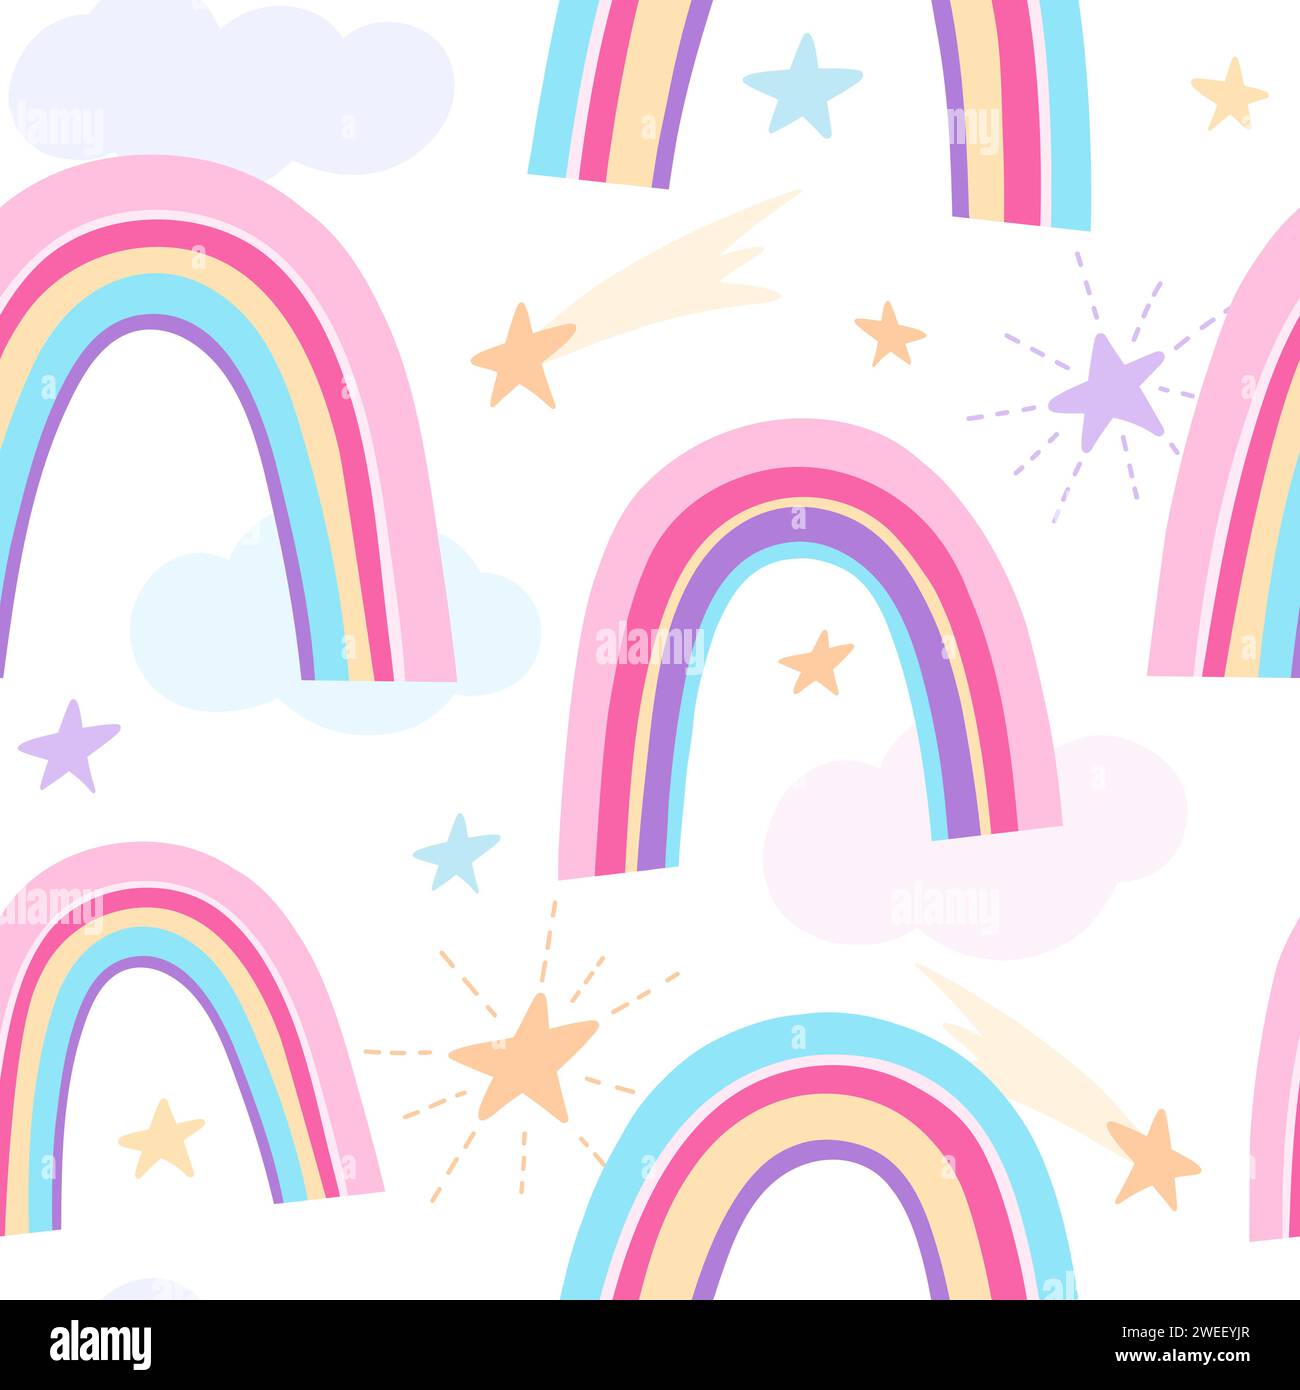 Cute seamless children pattern with rainbows, clouds and stars in boho, flat, doodle style Stock Vector